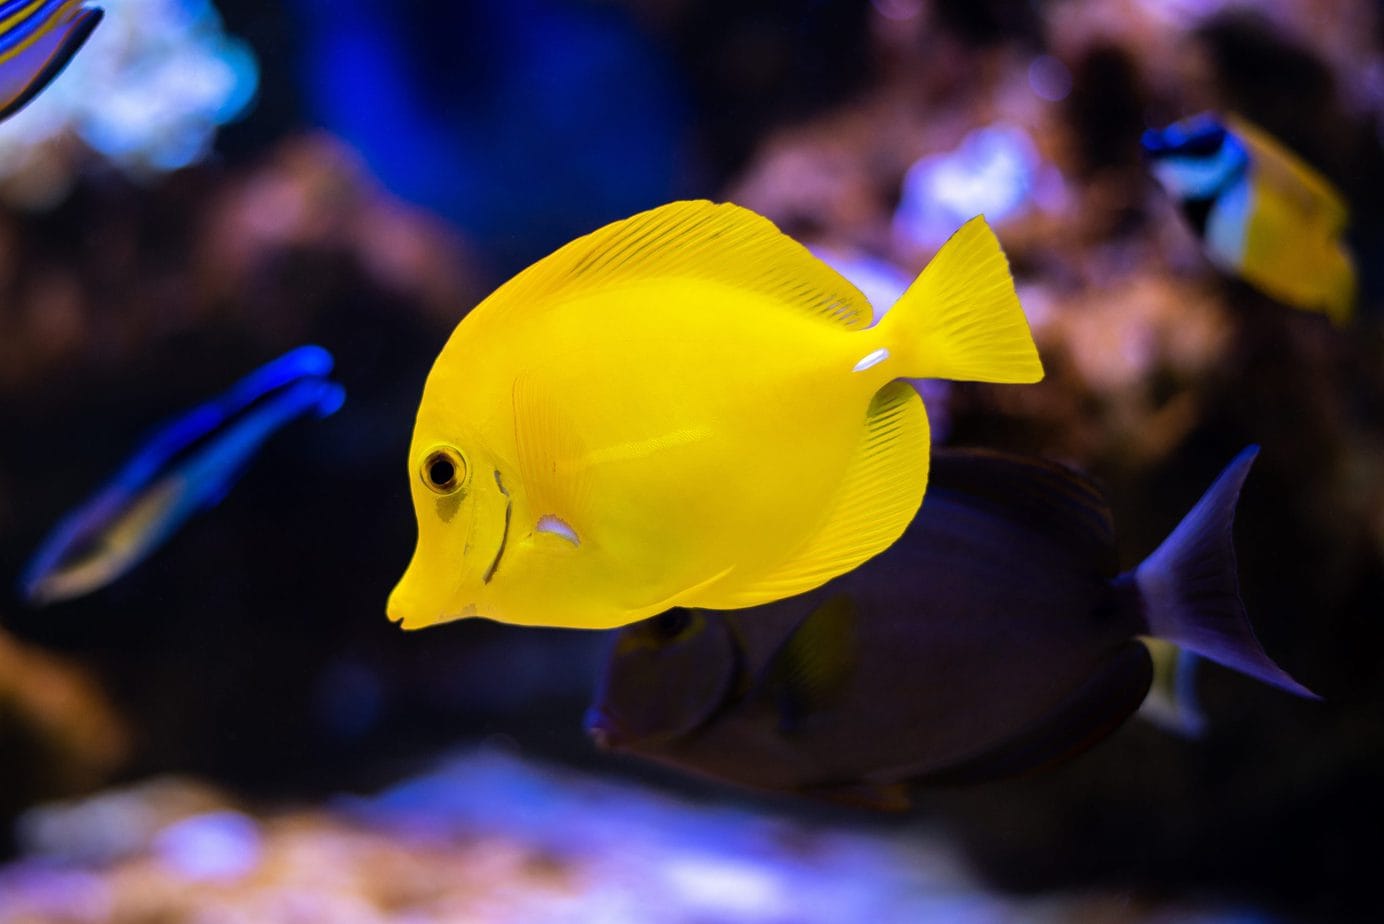 Buying your first aquarium. It is an ideal hobby for people looking for relaxation